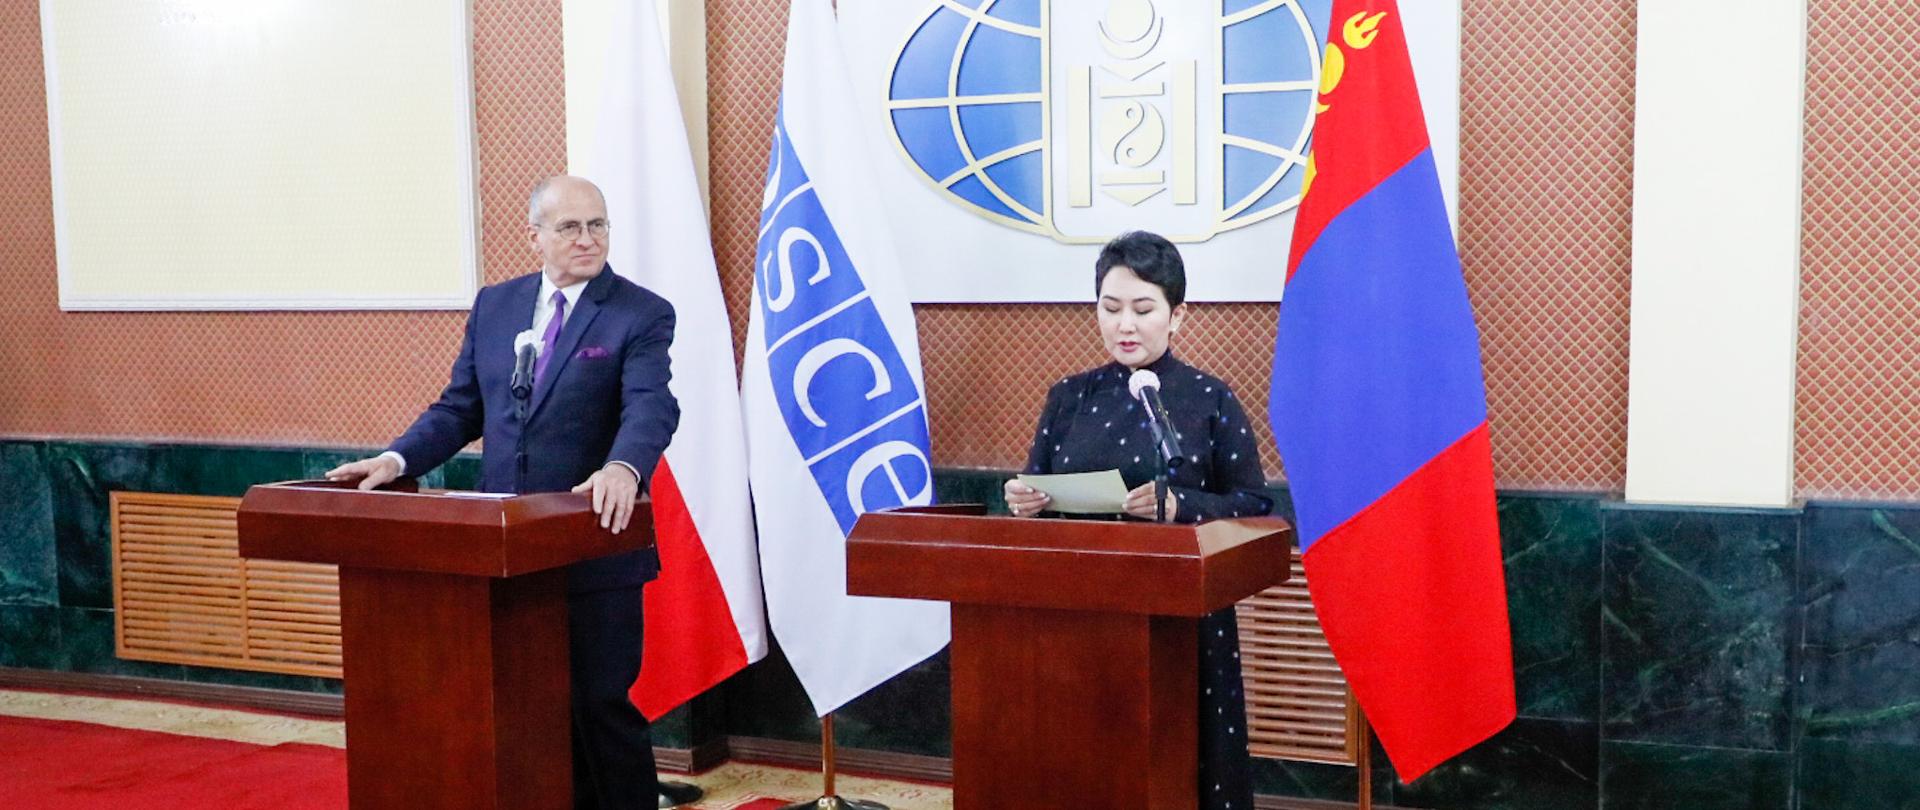 Press conference of the foreign ministers of Poland and Mongolia